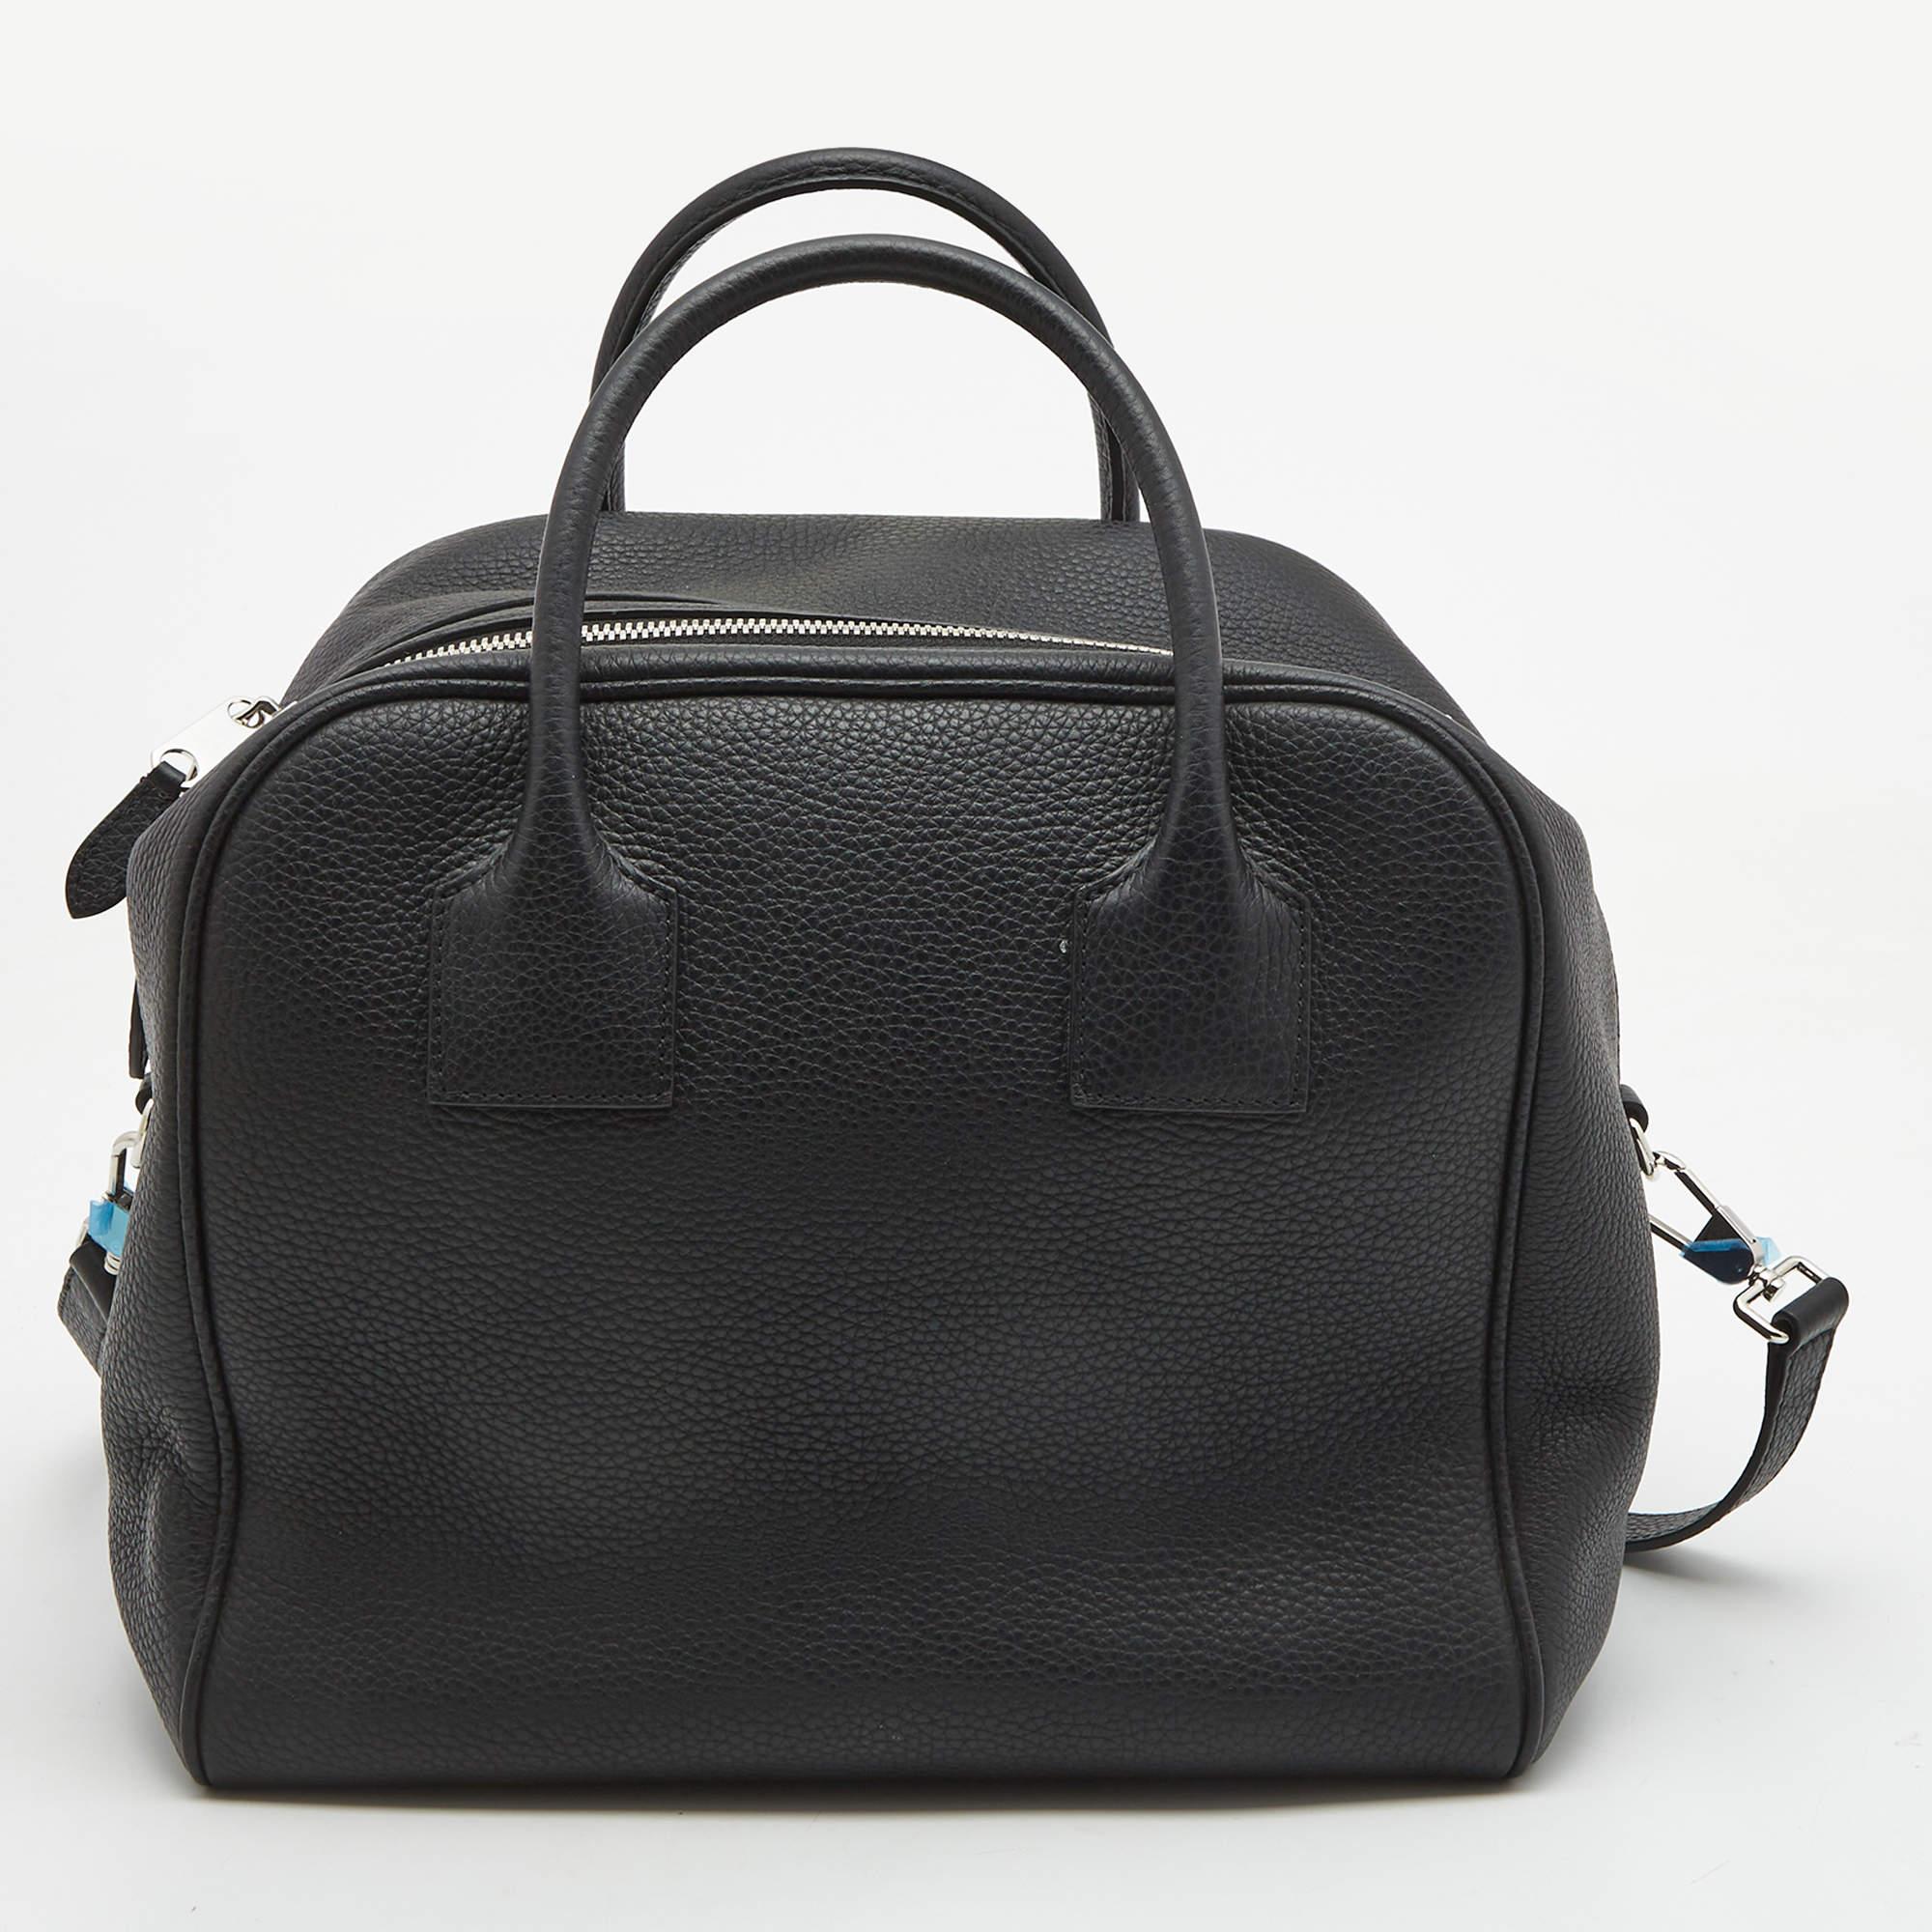 This Boston bag is an ergonomic creation that doesn't let you compromise on style. It not only looks timeless but also comes with a sleek and spacious interior to hold your everyday essentials. A wonderful piece that can accentuate your